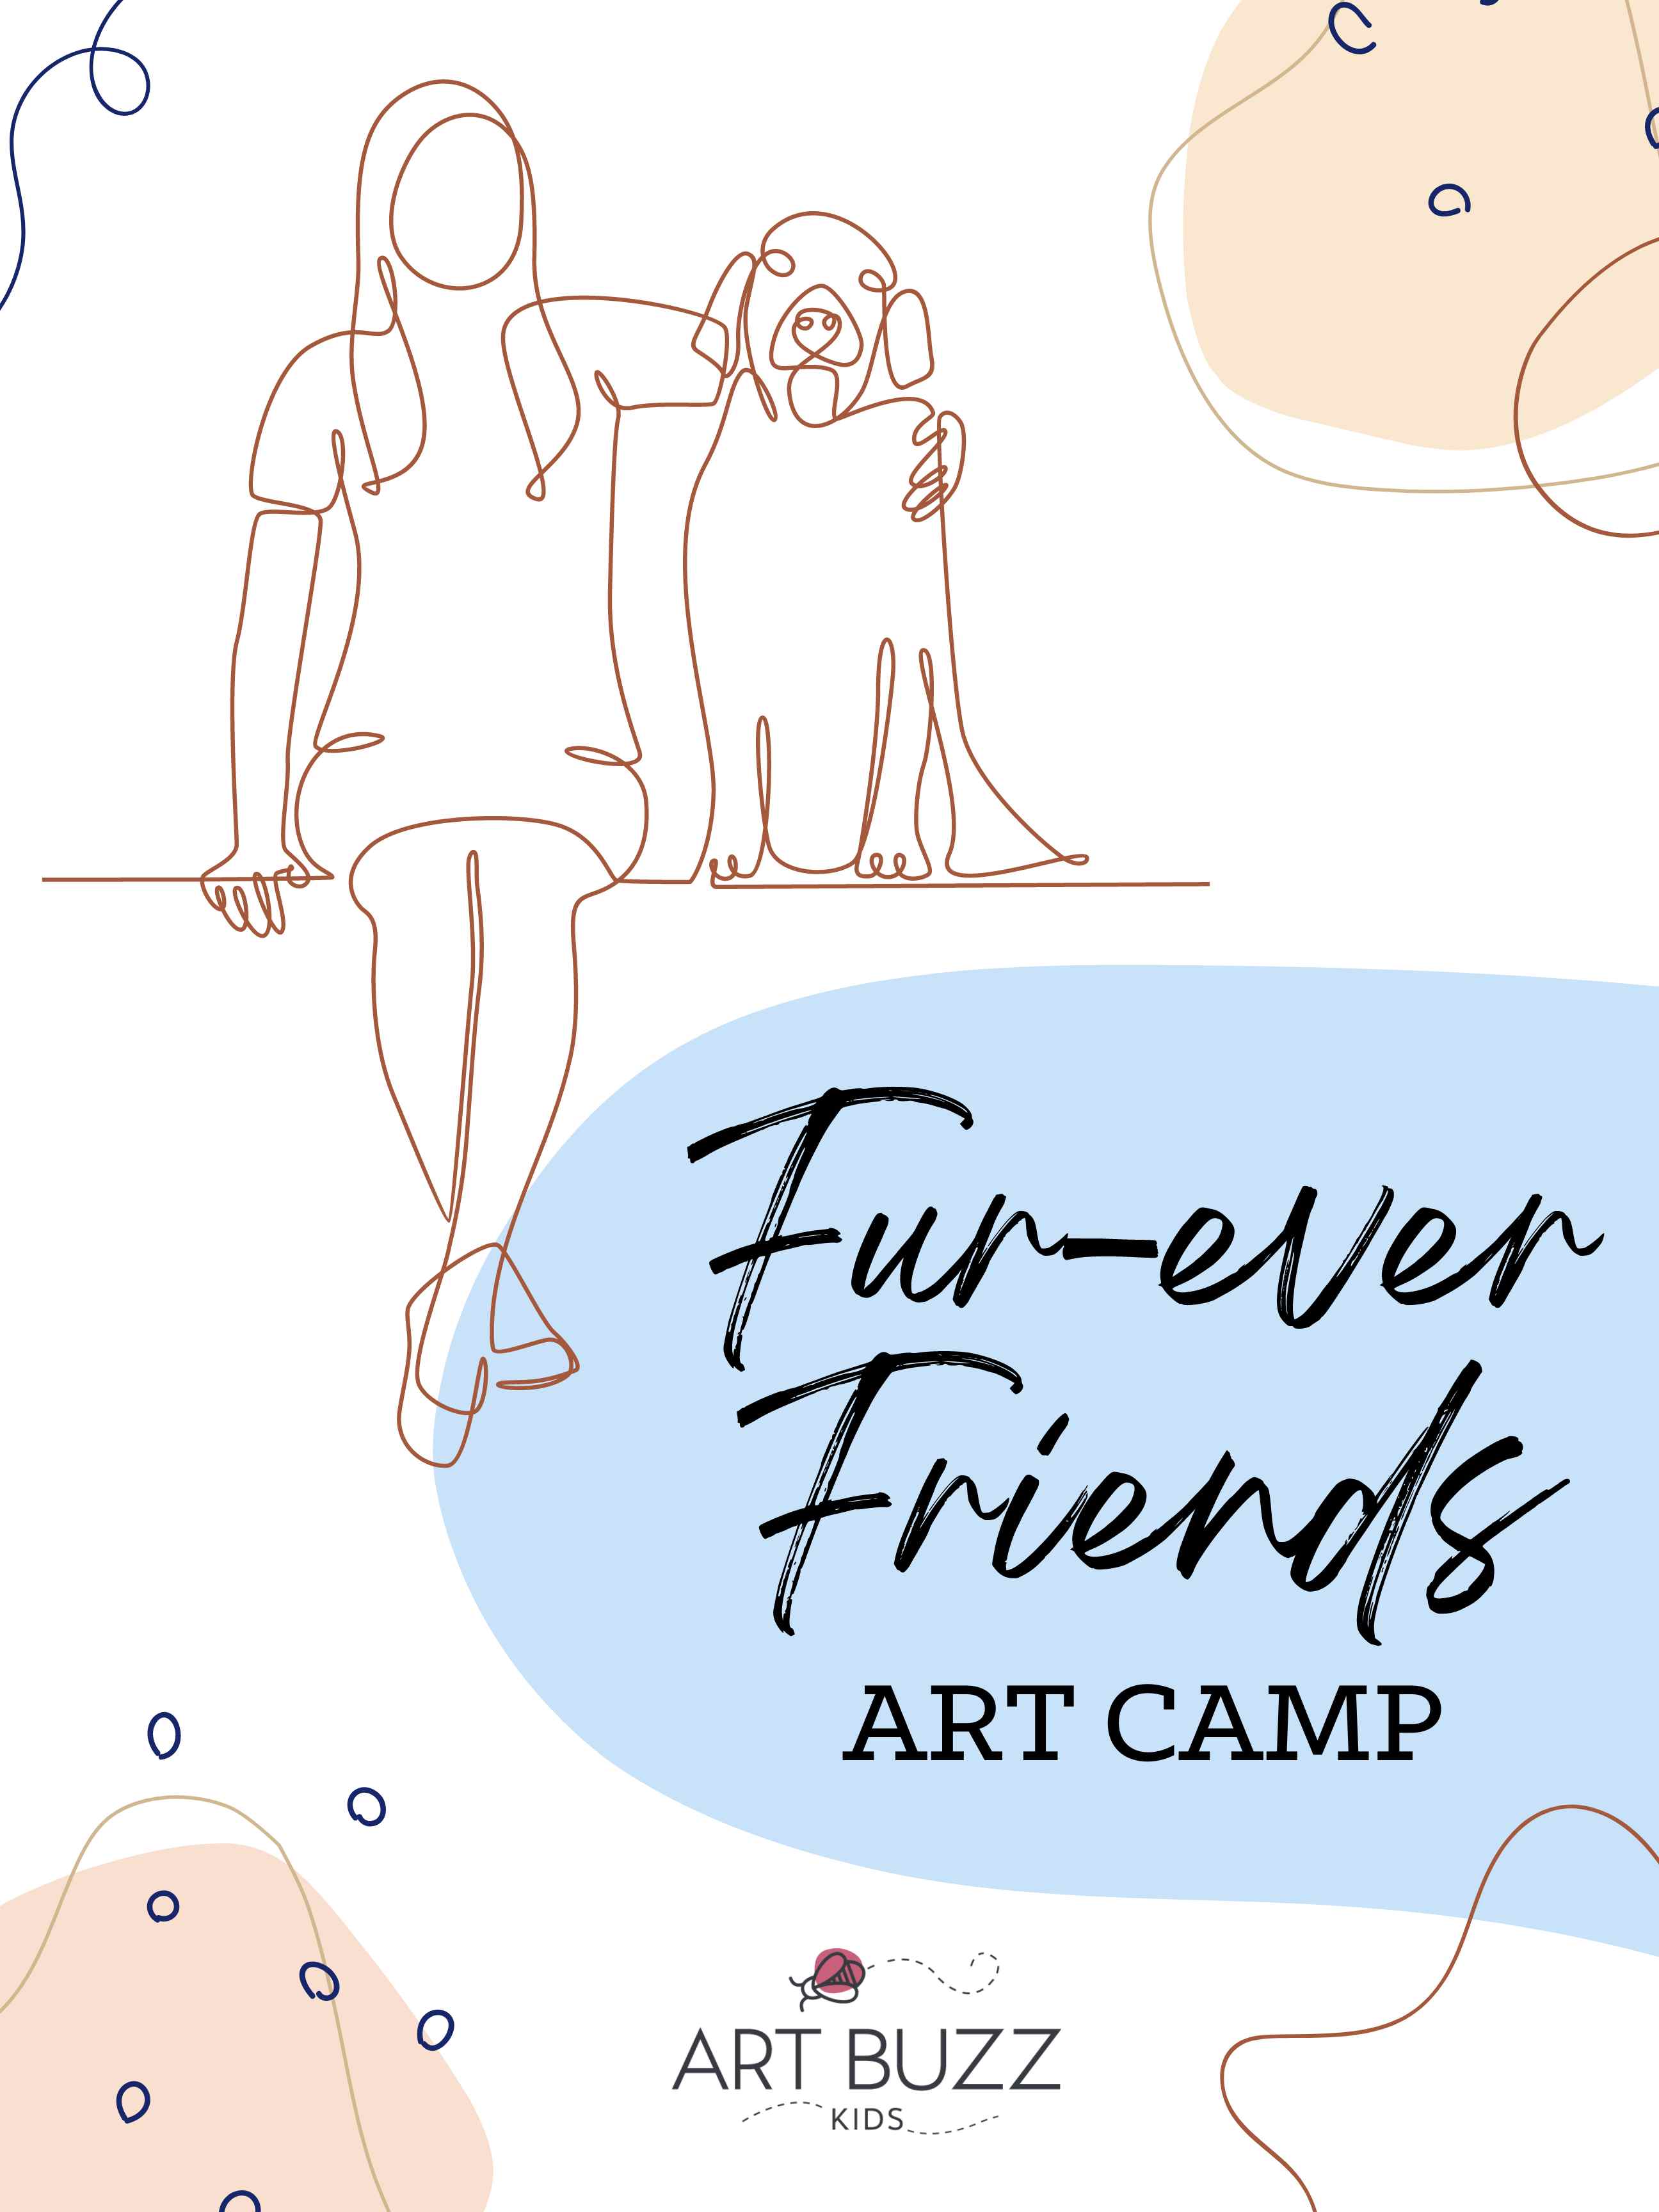 Fur-ever Friends Art Camp | Half Day Monday - Friday 9:00 am to 1:00 pm | $100 Deposit Required to Reserve a Seat